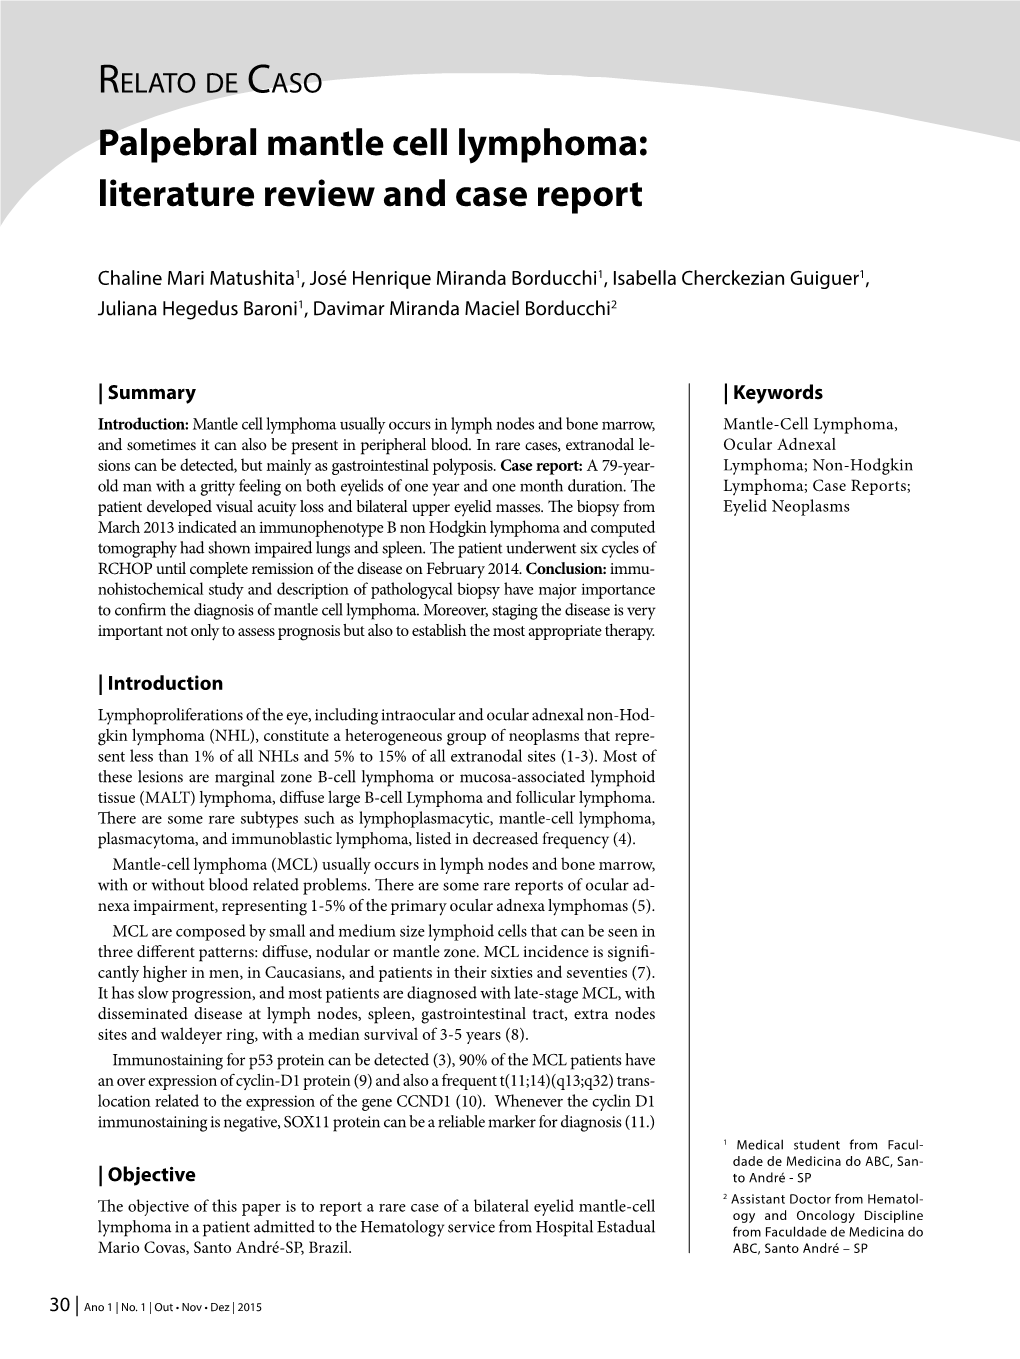 Palpebral Mantle Cell Lymphoma: Literature Review and Case Report